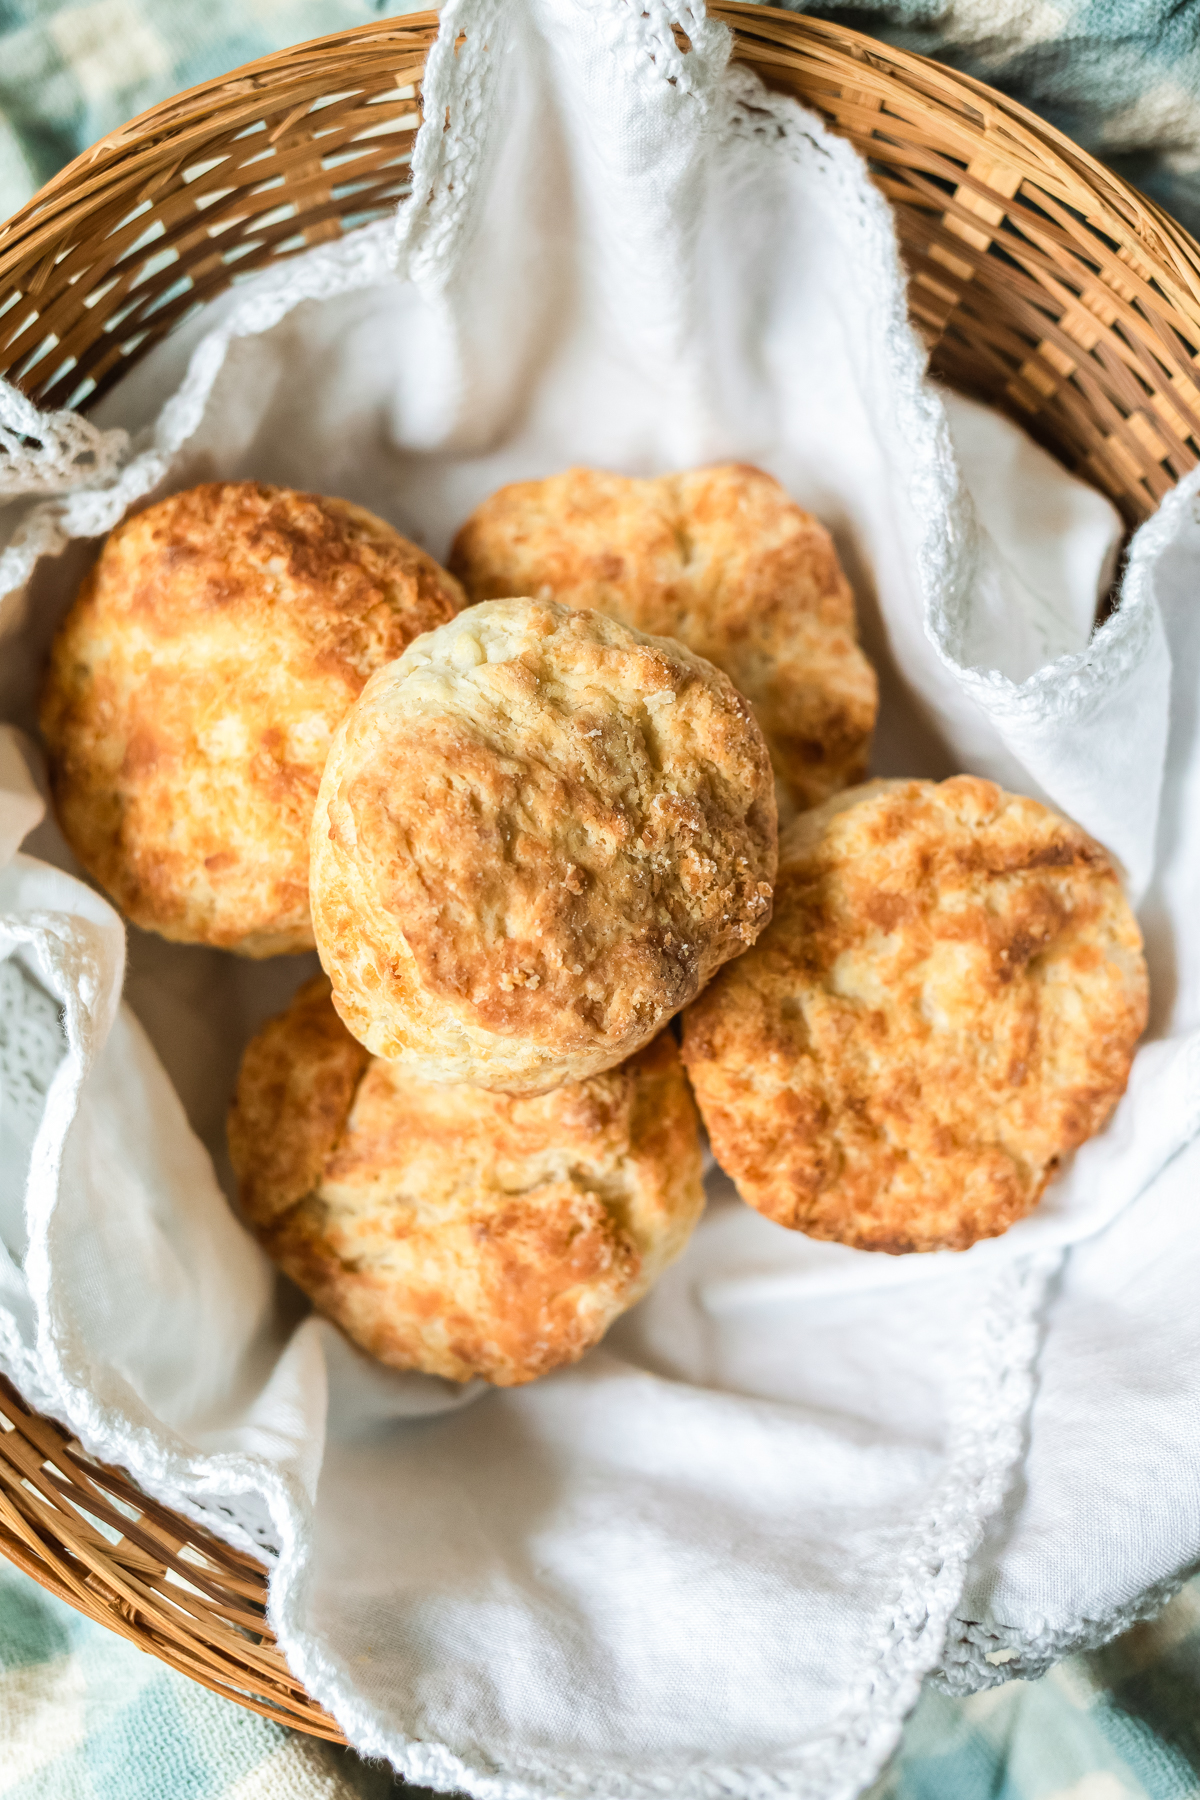 Fluffy biscuits made in the air fryer in a basket